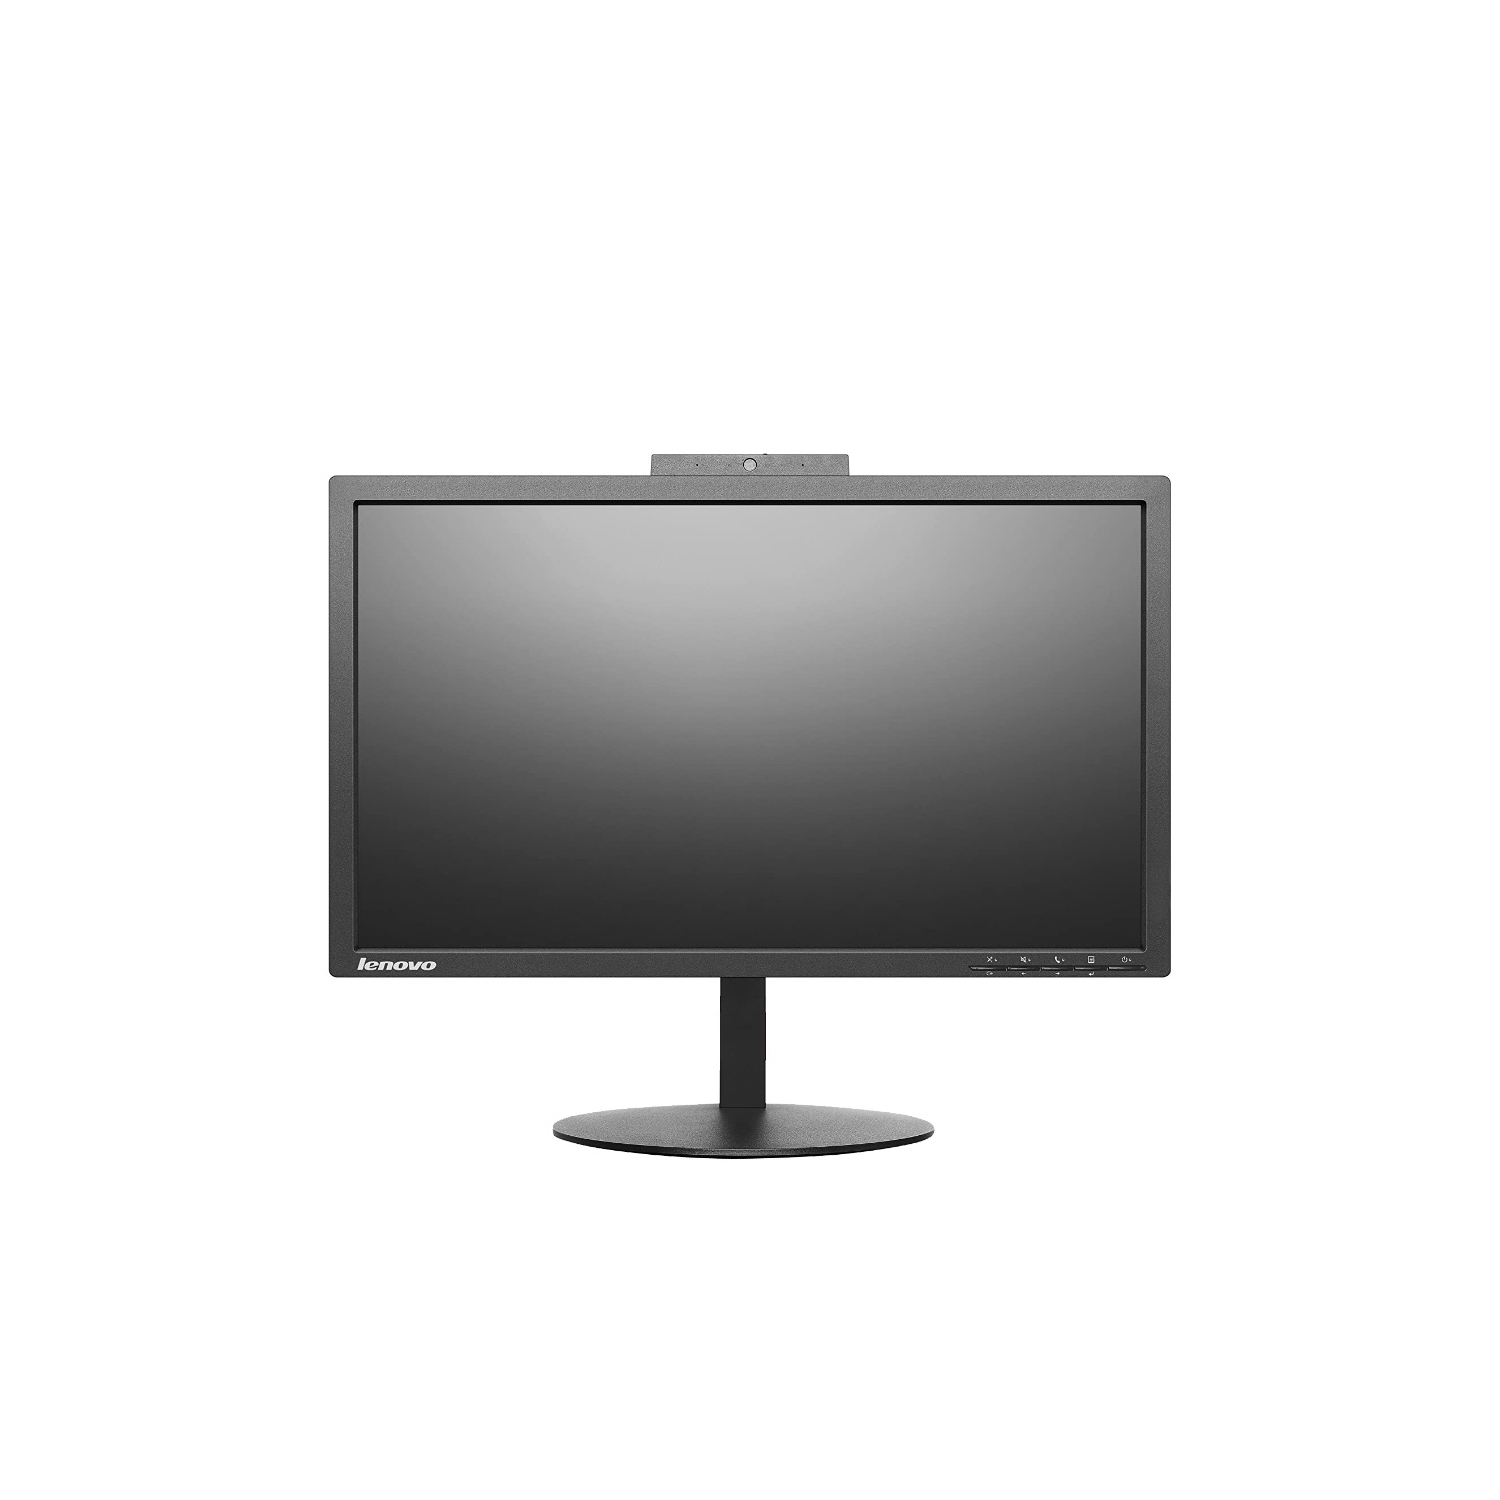 Hover interval Suppose Lenovo ThinkVision T2224zD - 21.5" Monitor Full HD LED - 1920 x 1080 -  Built in Webcam - HDMI - VGA - Display Port - (Refurbished) | Best Buy  Canada